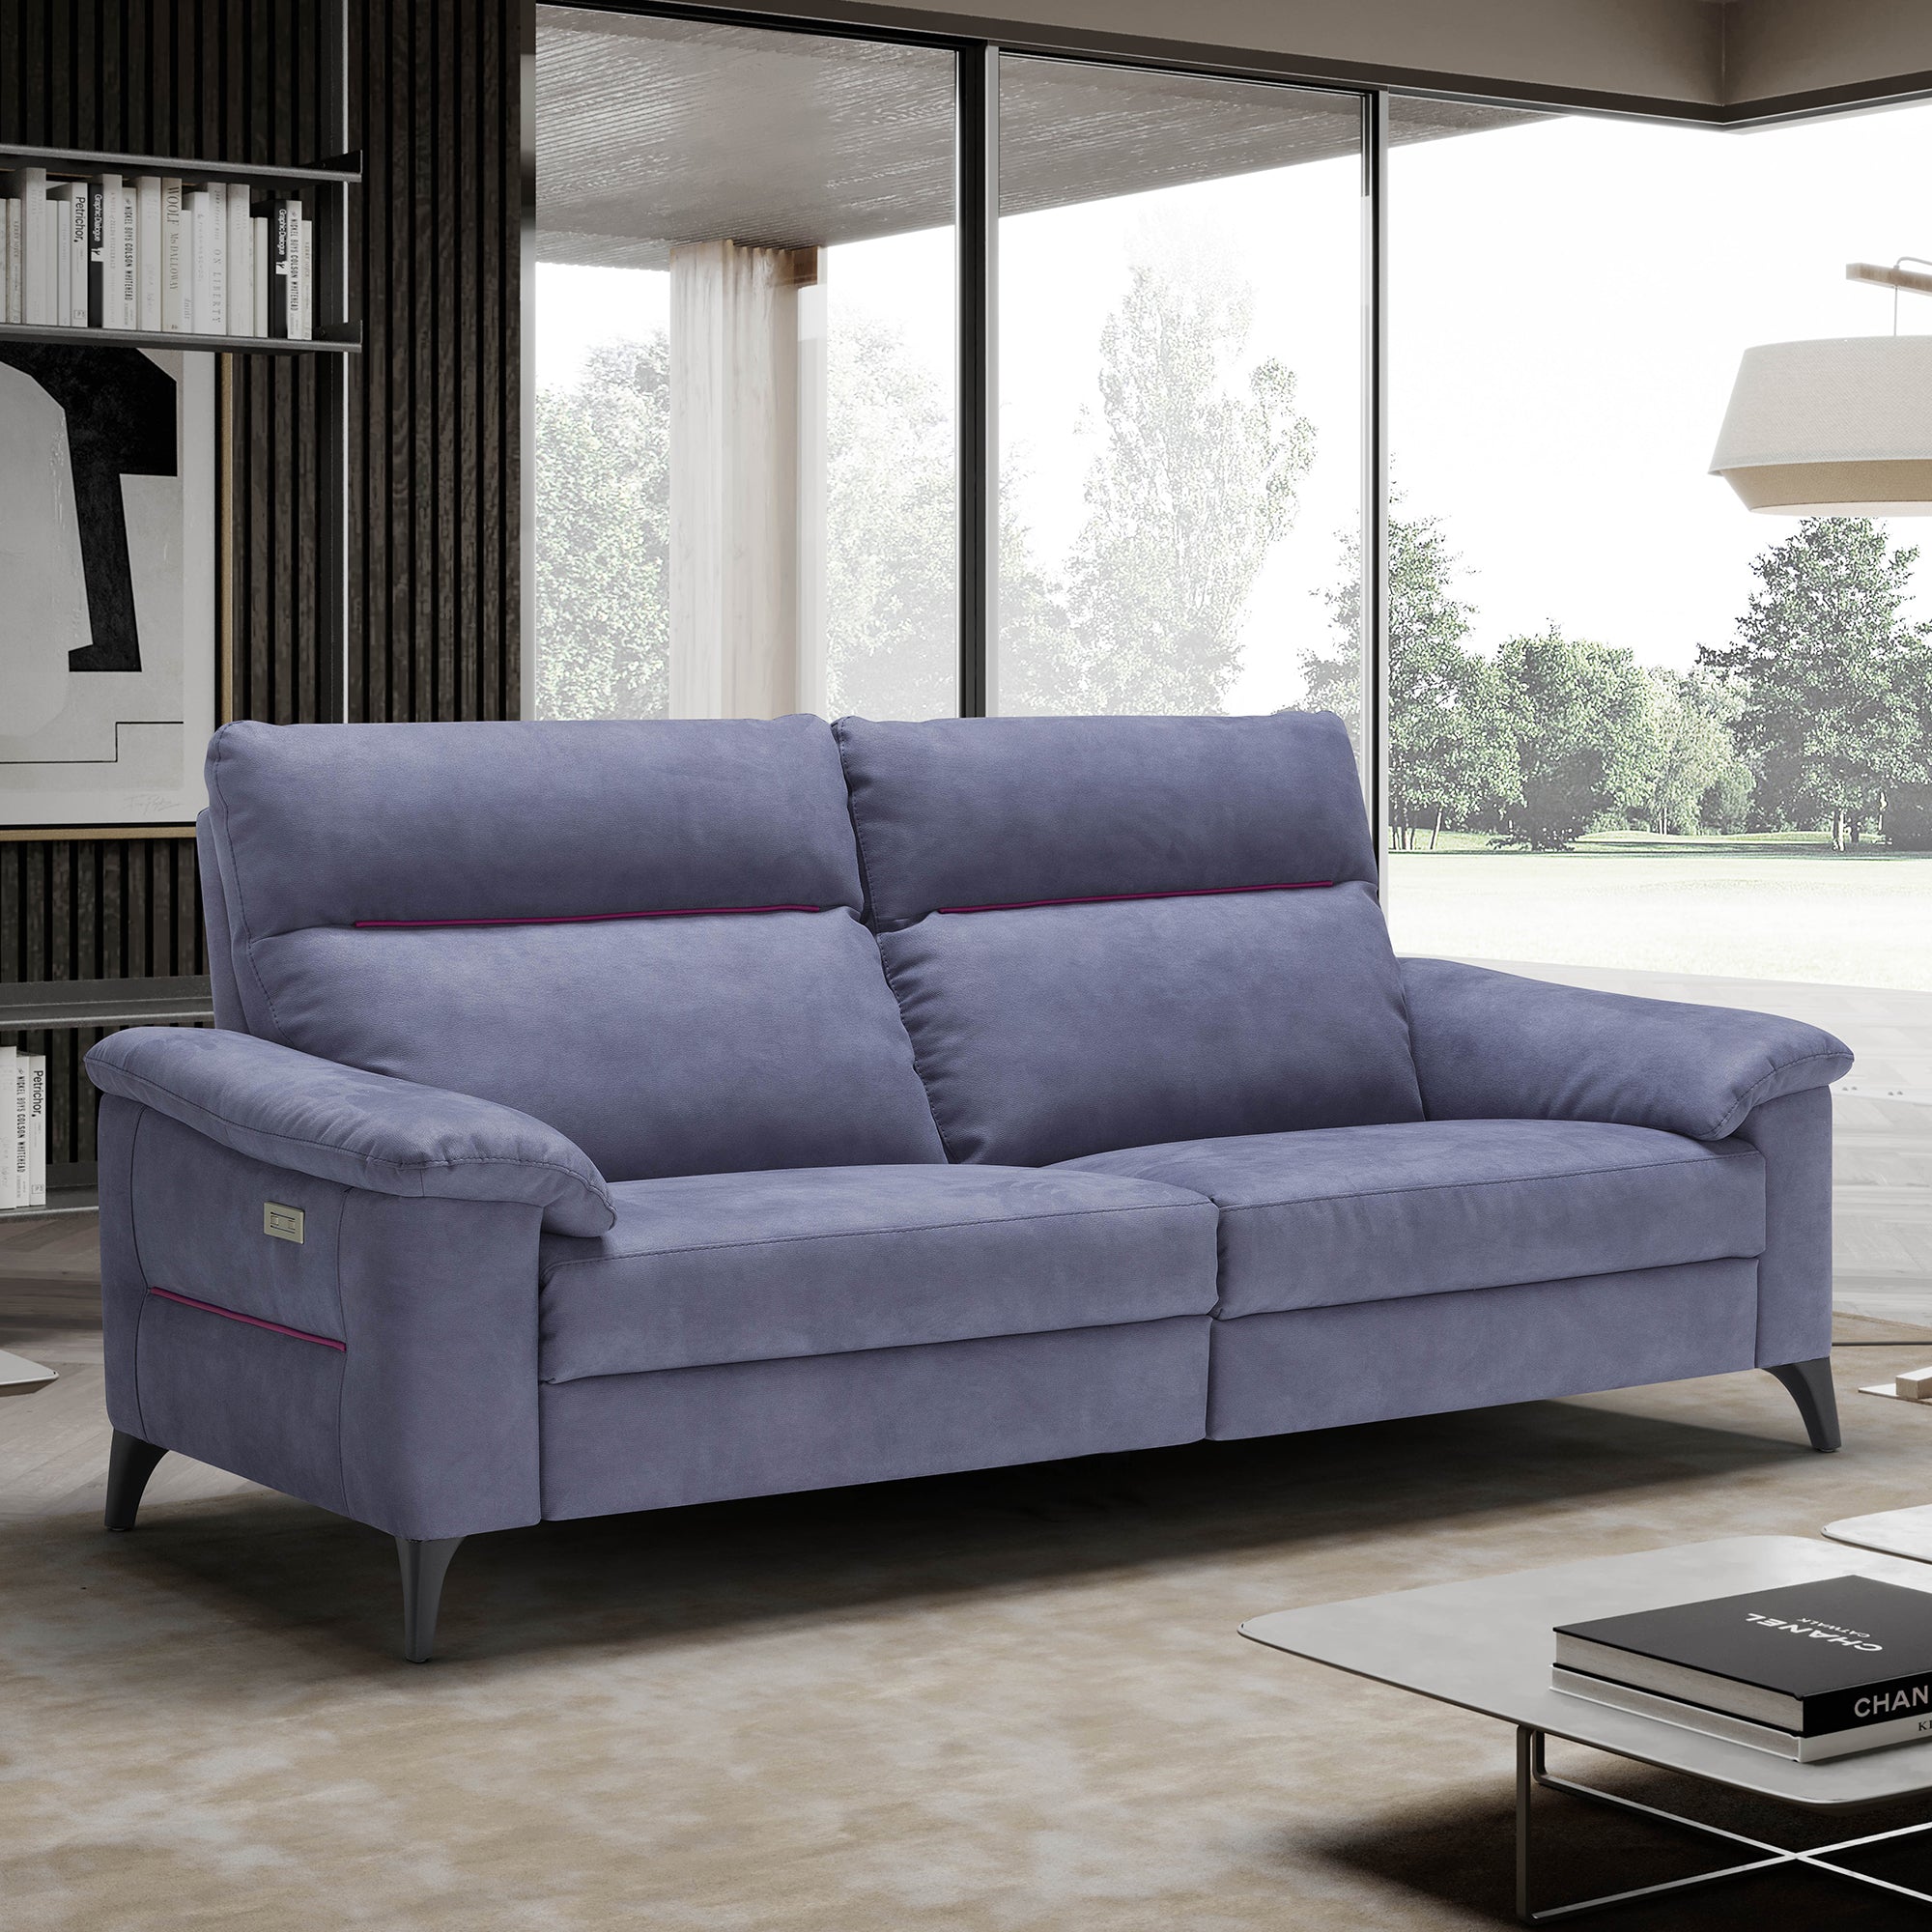 Treviso - 3 Seat 2 Power Recliner Sofa In Fabric Or Leather Microfibre